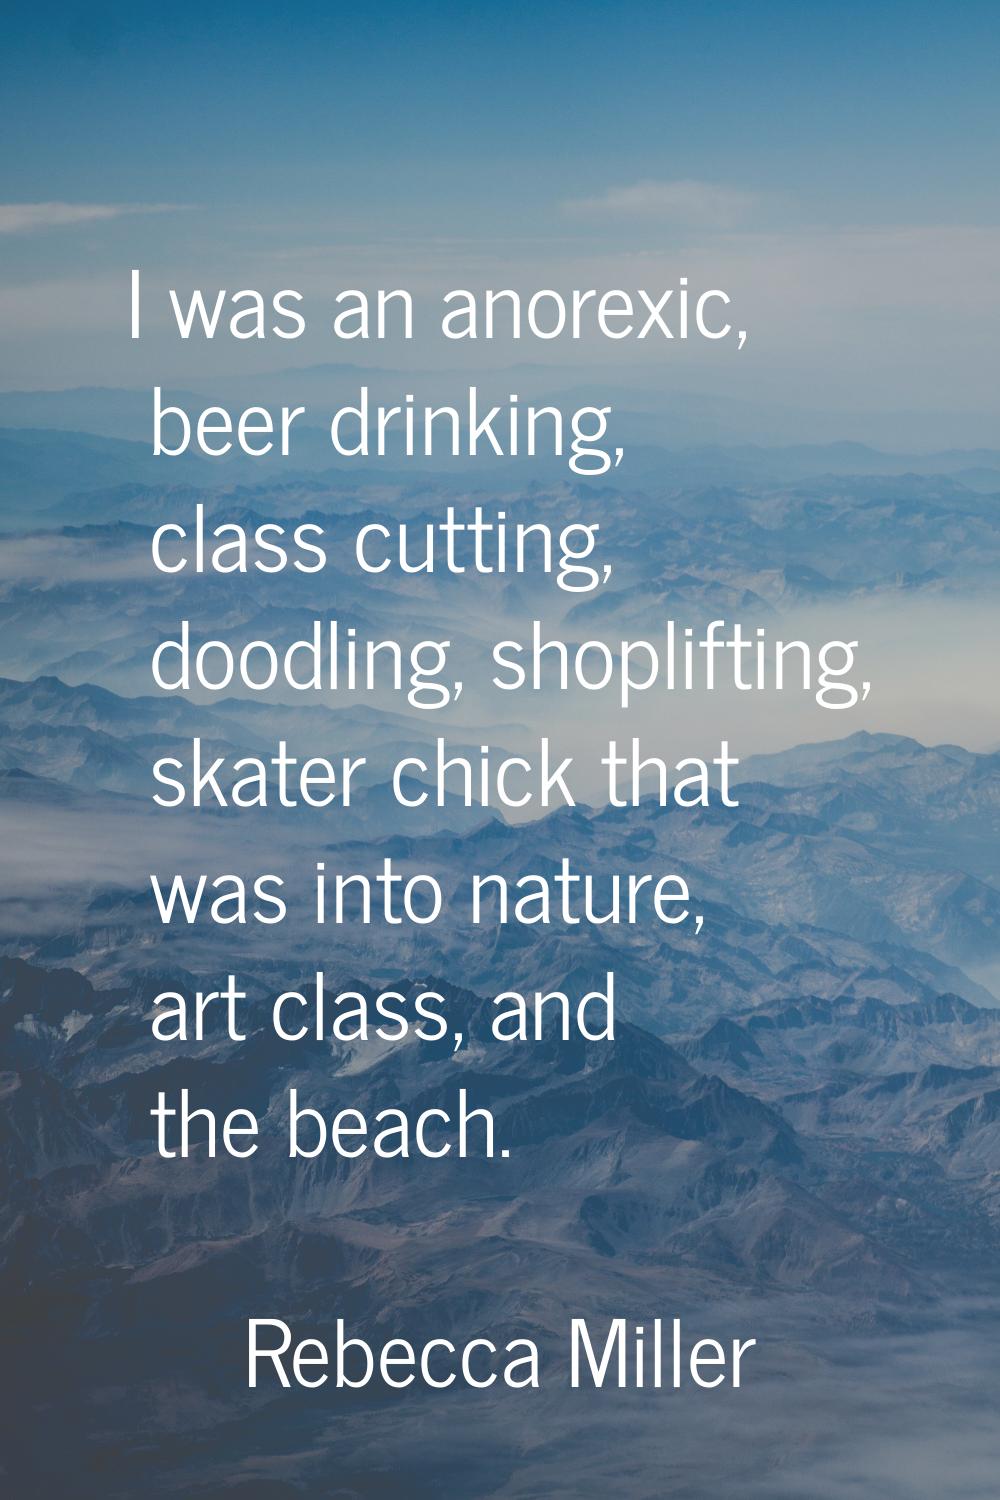 I was an anorexic, beer drinking, class cutting, doodling, shoplifting, skater chick that was into 